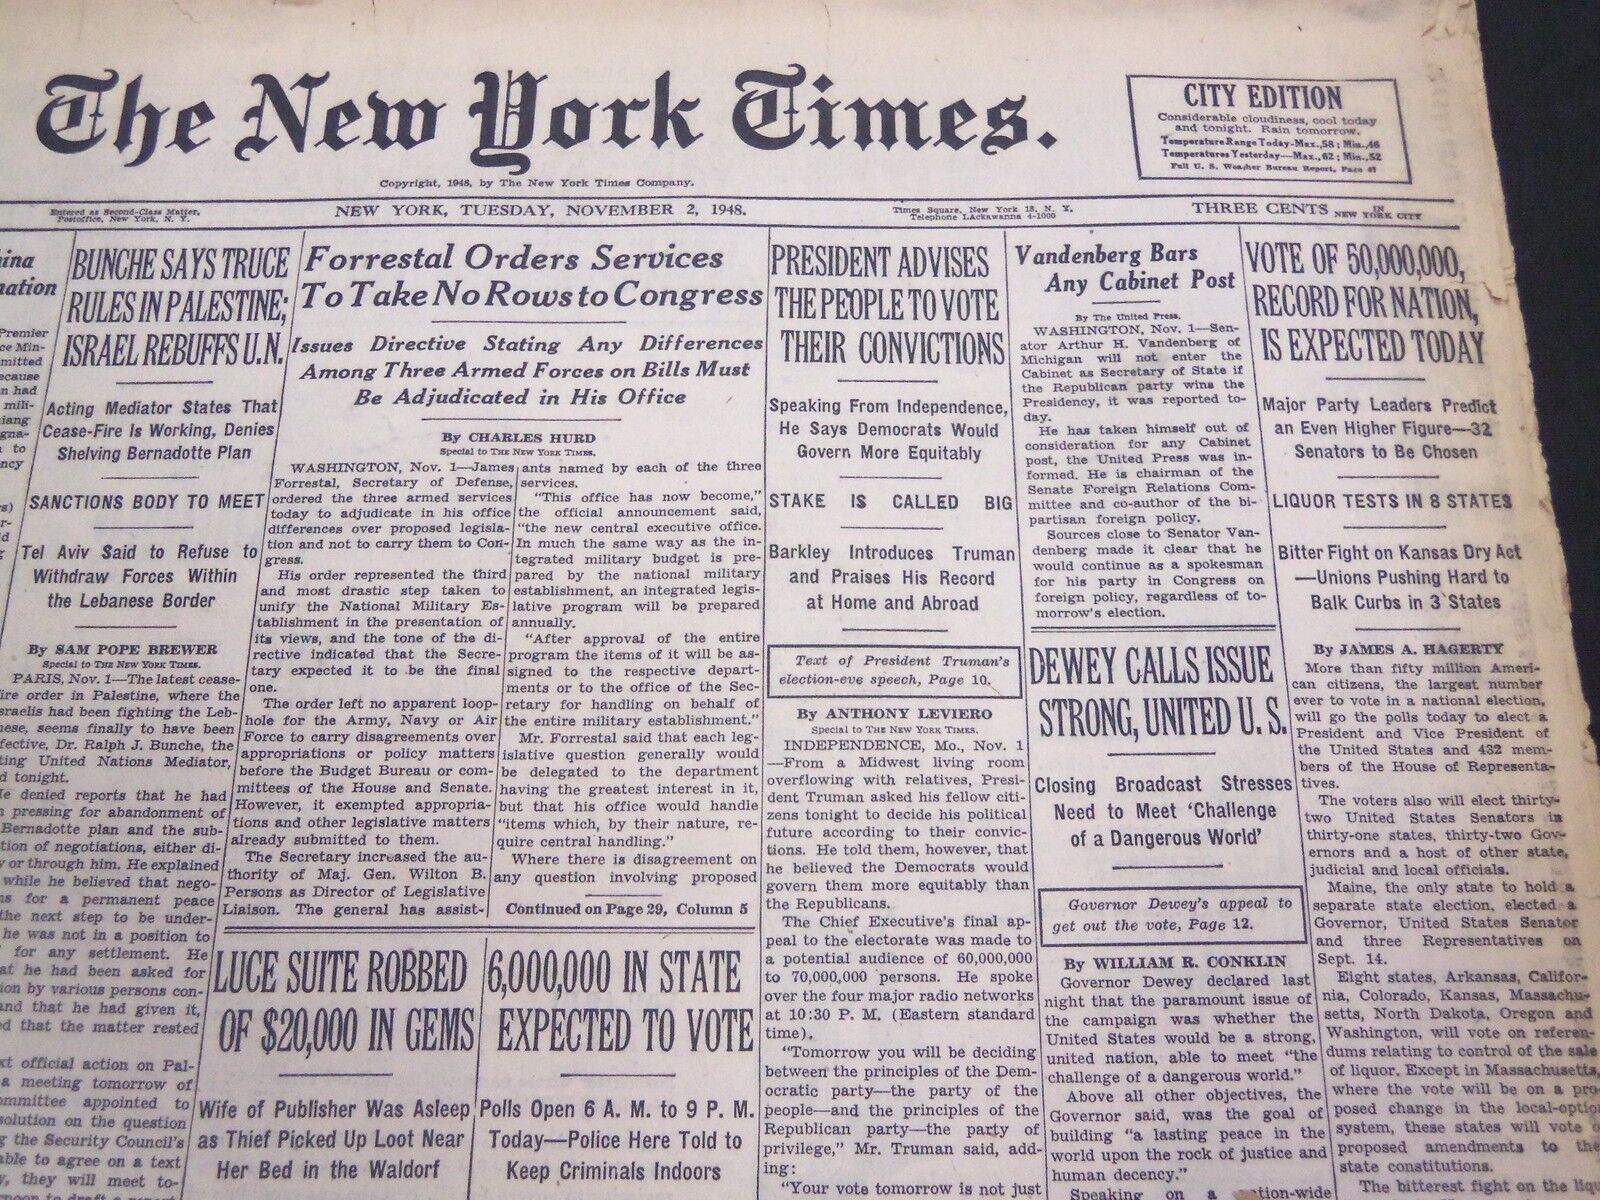 1948 NOVEMBER 2 NEW YORK TIMES - VOTE OF 50,000,000 EXPECTED TODAY - NT 4423